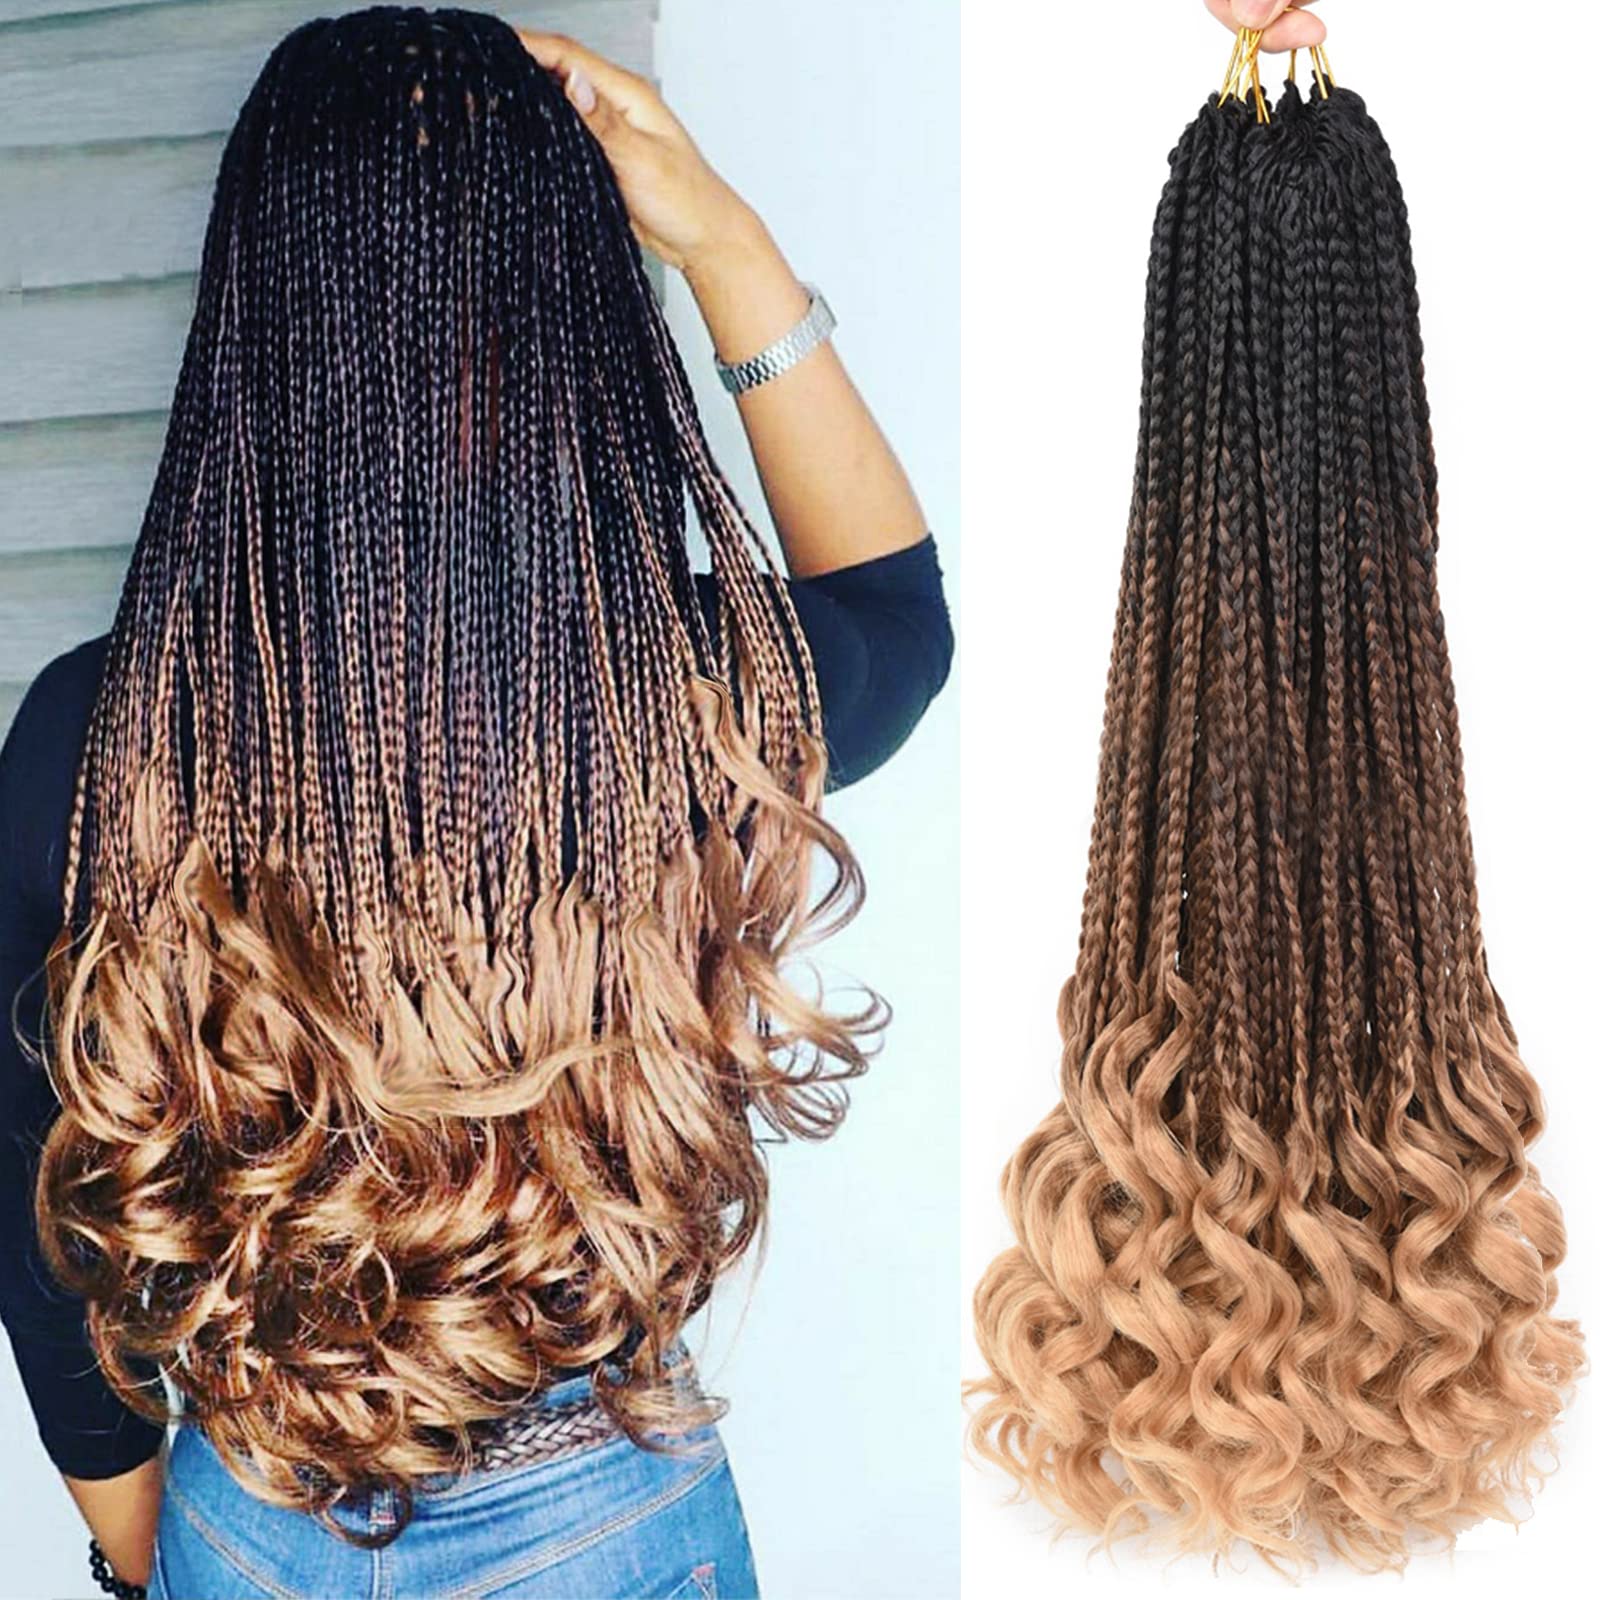 Crochet Box Braids With Curly Ends Mixed Ombre Black Blonde Synthetic Braiding Hair Extensions 3X Box Braids 22Strands/pack